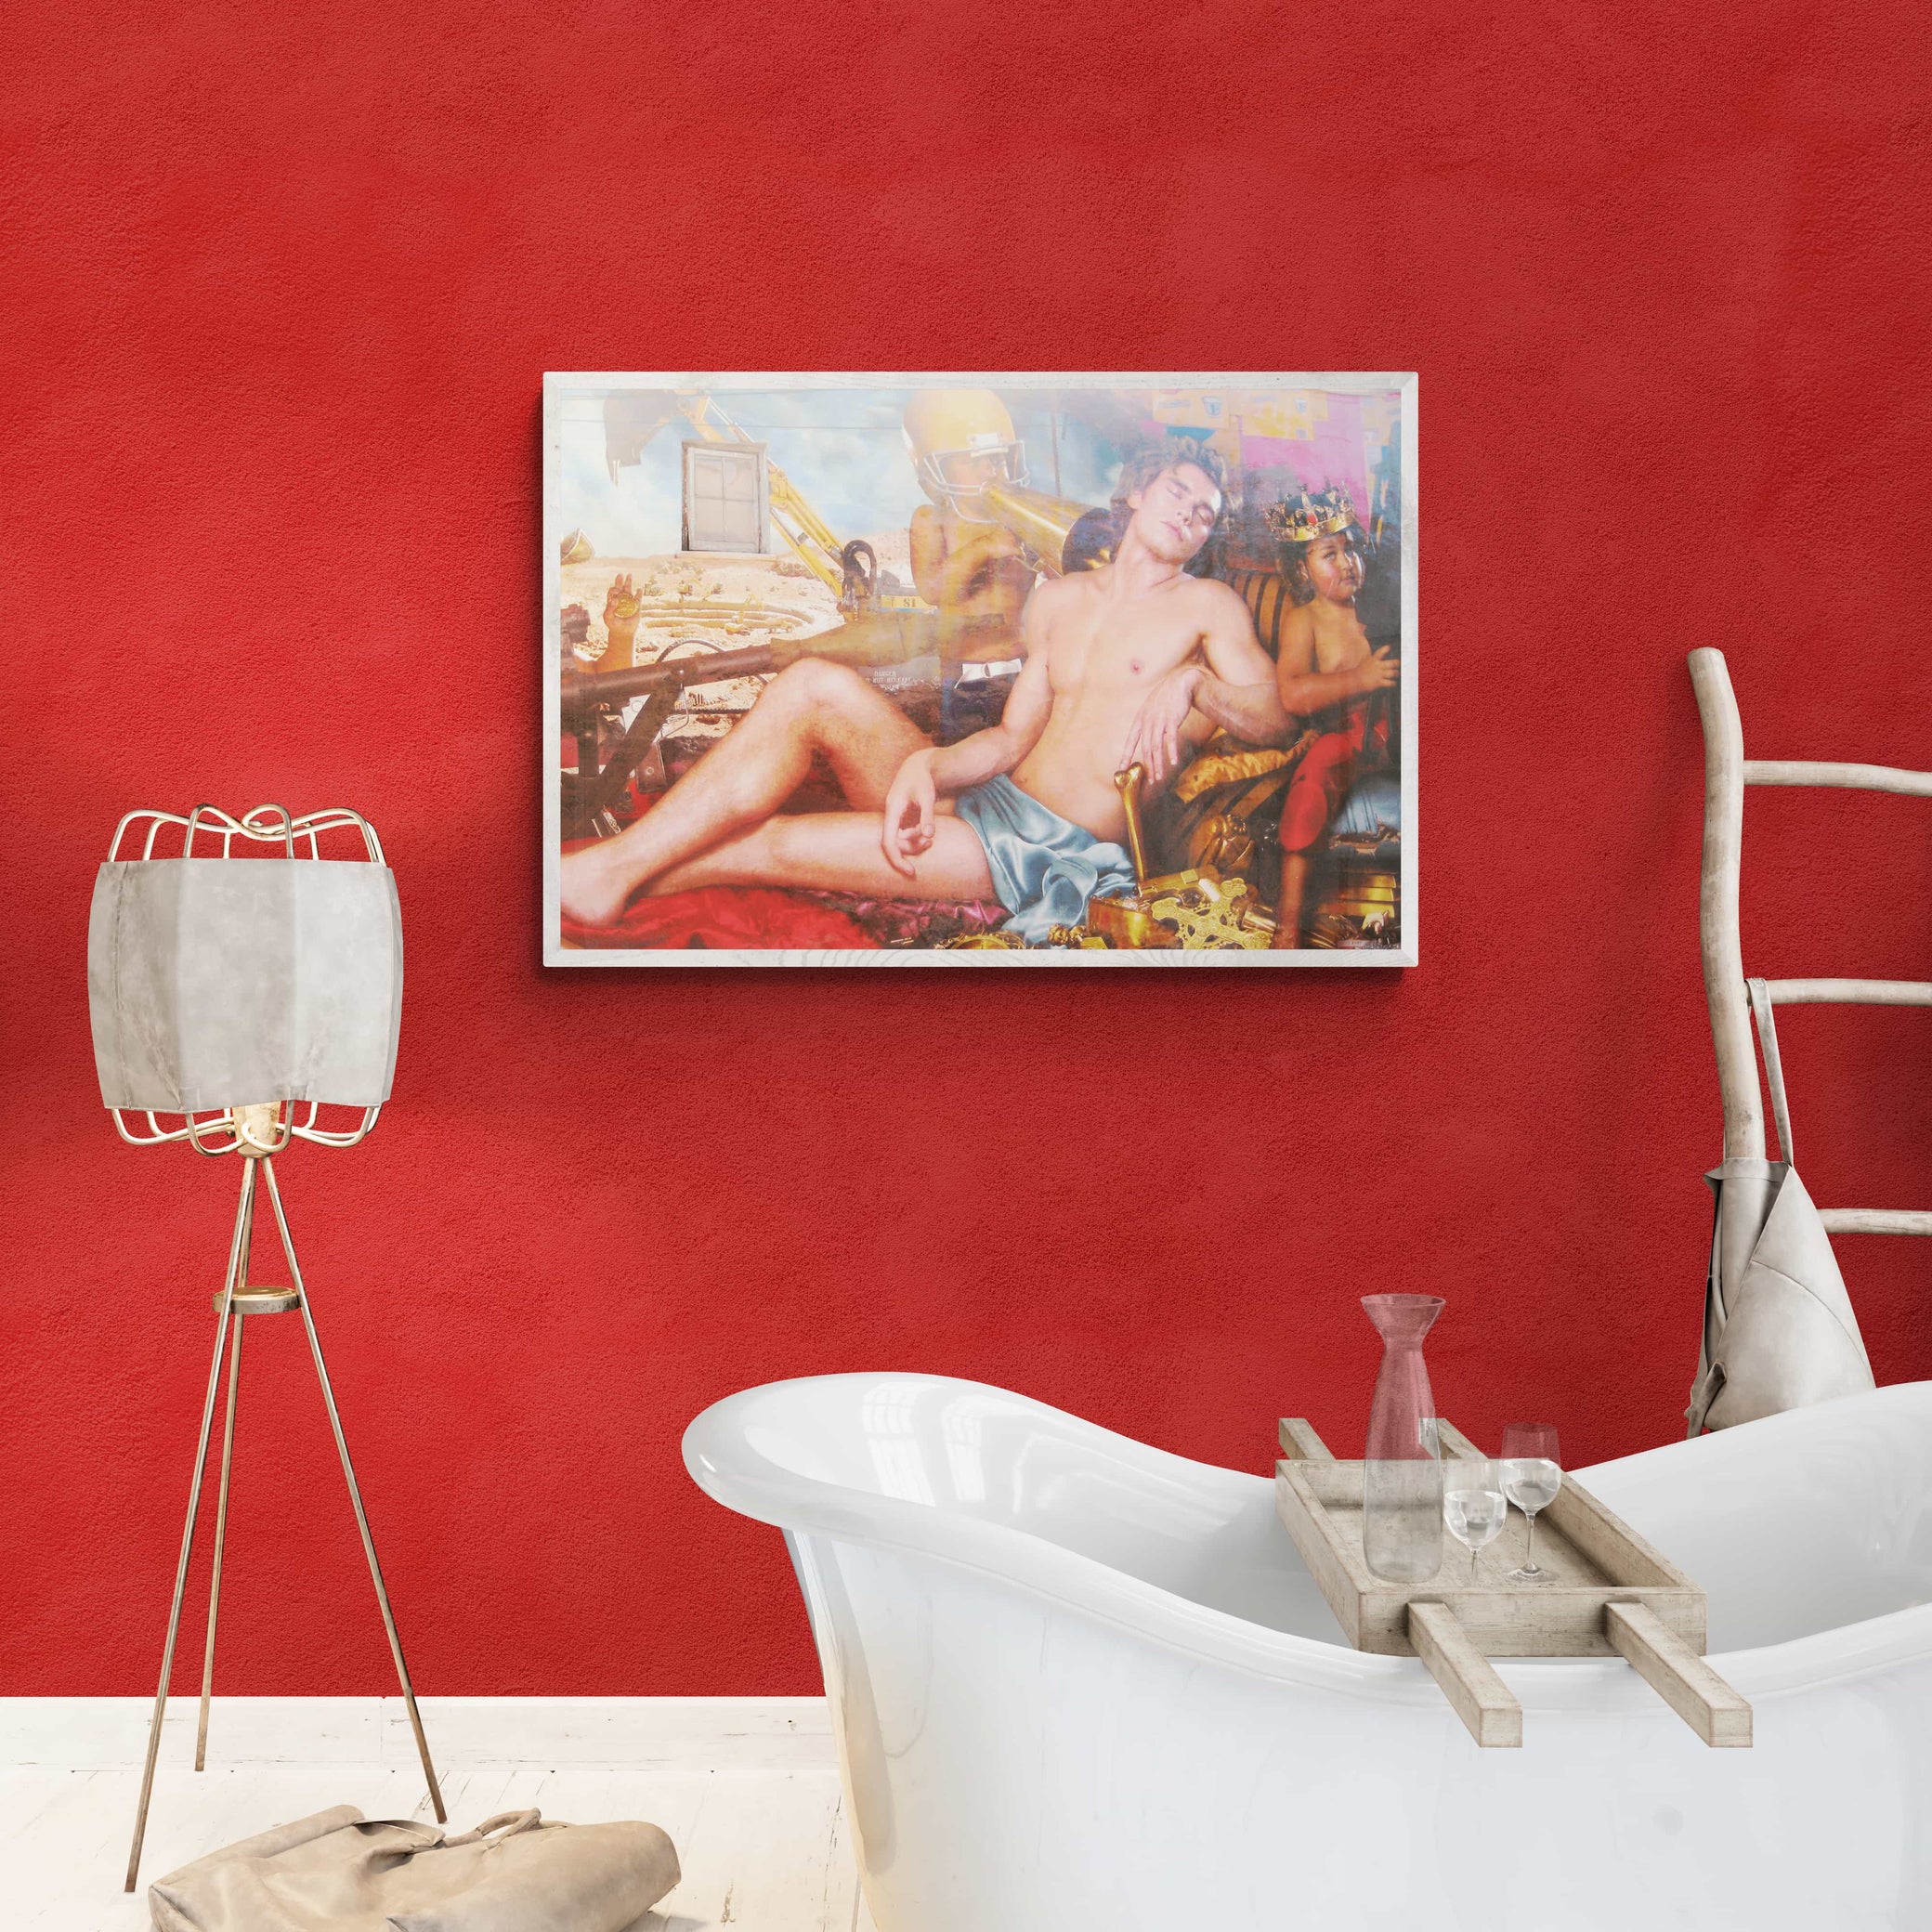 a photo of a bohemian style bathroom with tub and Milton Wes Art canvas framed print hanging on the wall